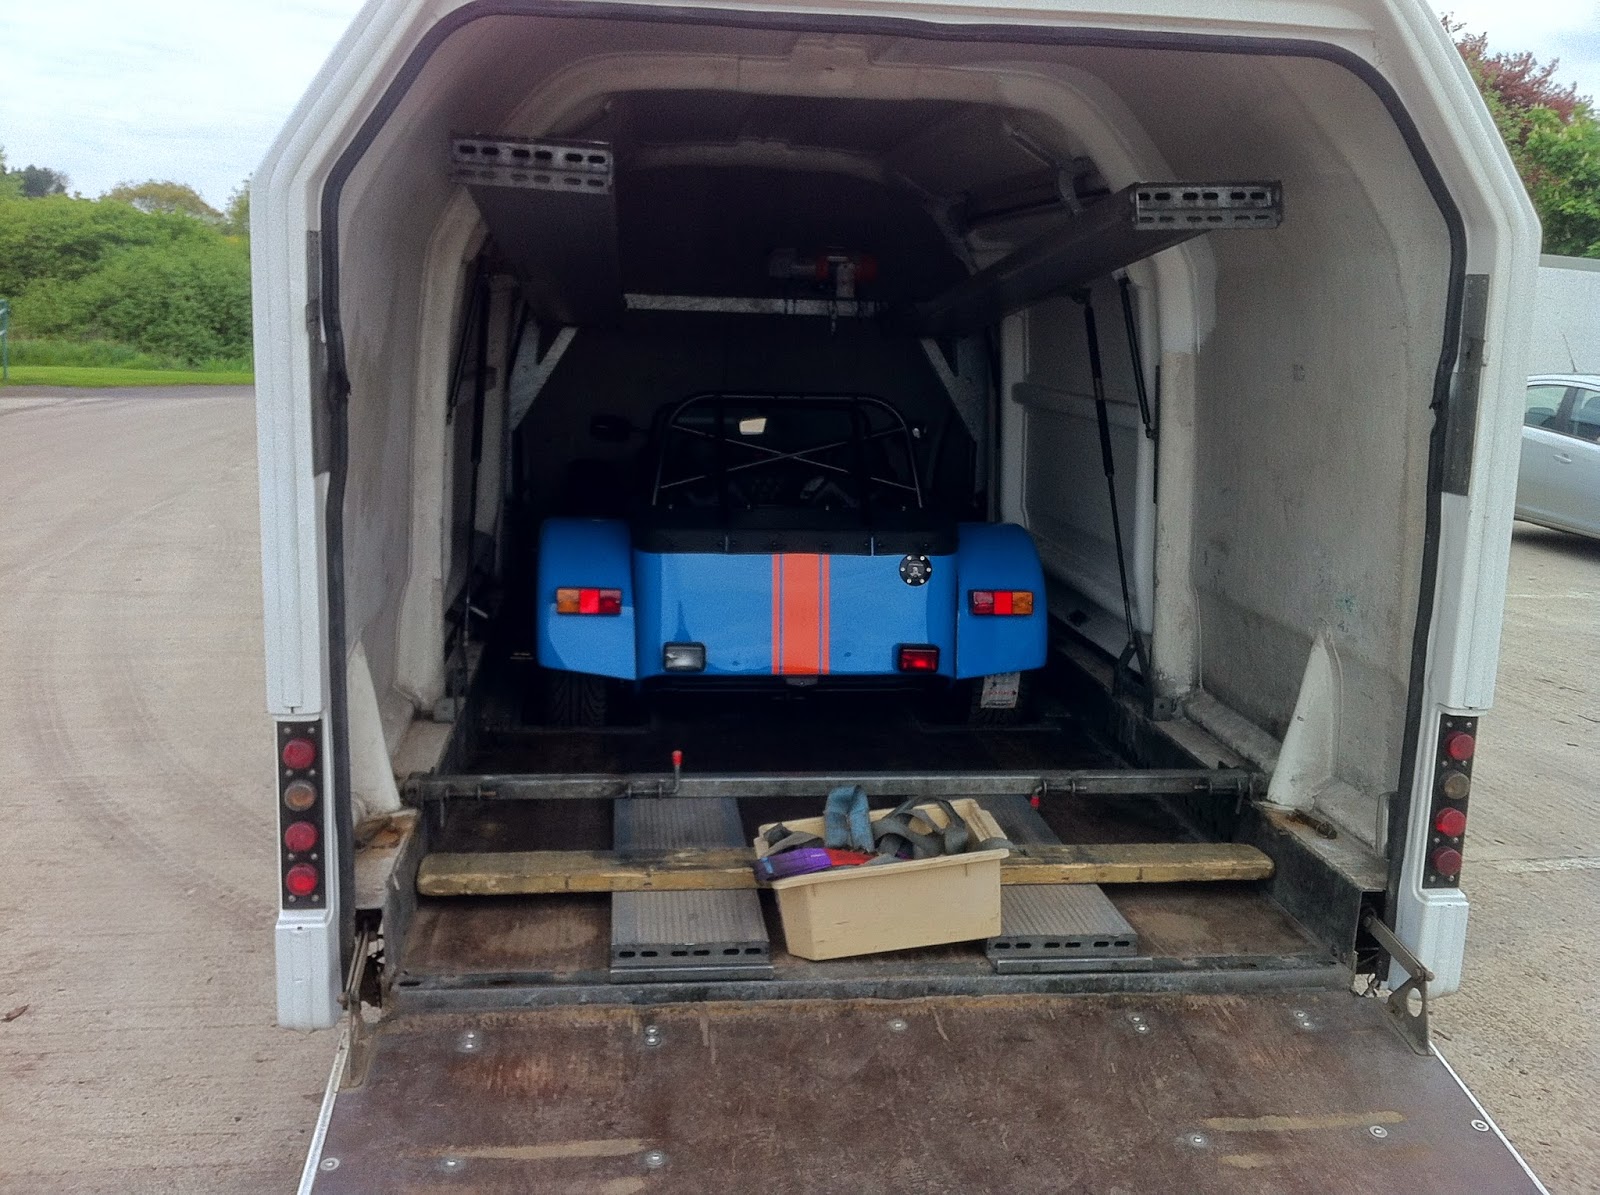 The R500 loaded into a covered car transporter ready to be taken to Nottingham VOSA test centre